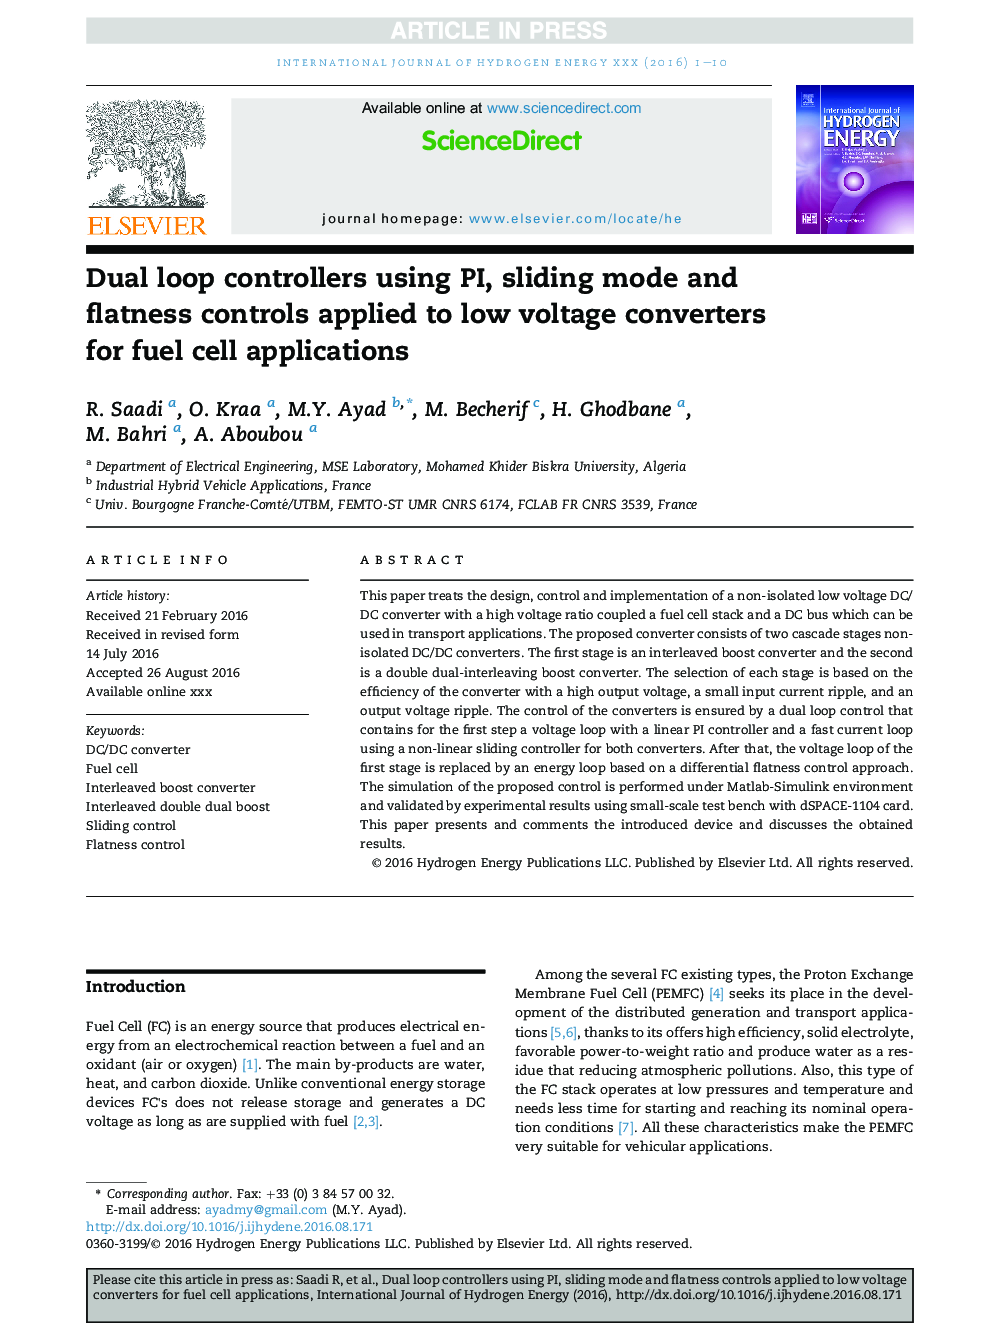 Dual loop controllers using PI, sliding mode and flatness controls applied to low voltage converters for fuel cell applications